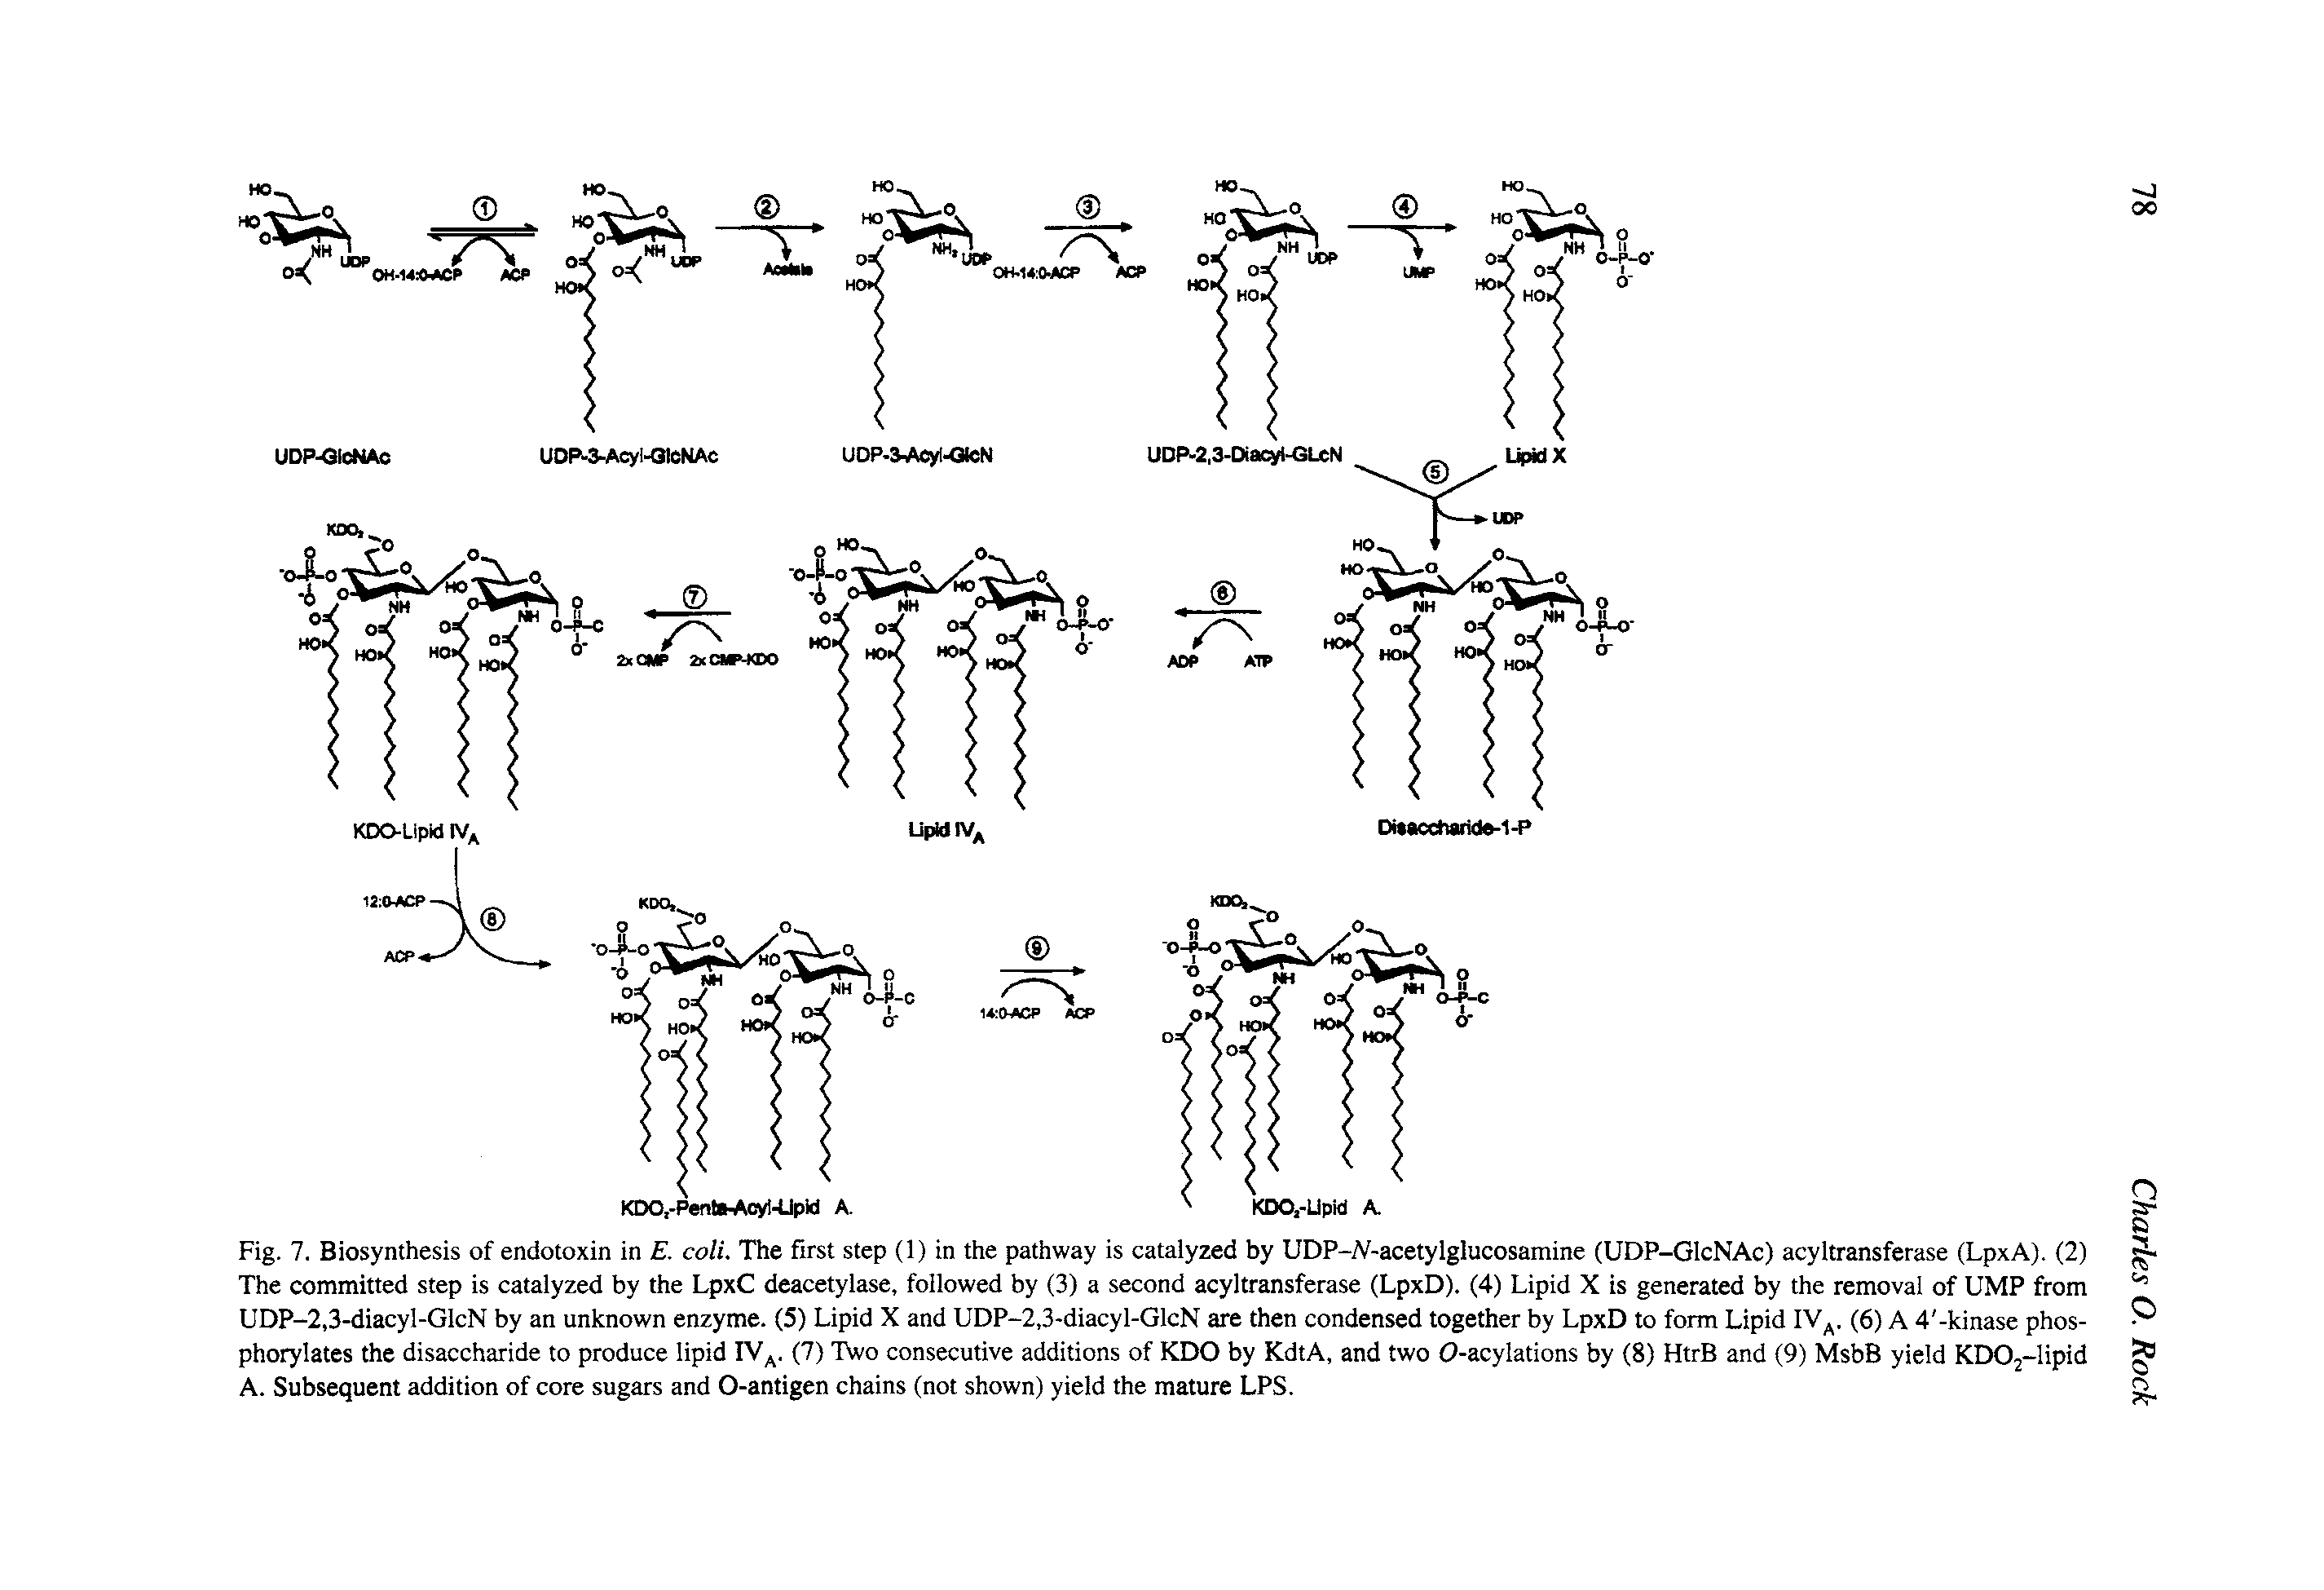 Fig. 7. Biosynthesis of endotoxin in E. coli. The first step (1) in the pathway is catalyzed by UDP-A -acetylglucosamine (UDP-GlcNAc) acyltransferase (LpxA). (2) The committed step is catalyzed by the LpxC deacetylase, followed by (3) a second acyltransferase (LpxD). (4) Lipid X is generated by the removal of UMP from UDP-2,3-diacyl-GlcN by an unknown enzyme. (5) Lipid X and UDP-2,3-diacyl-GlcN are then condensed together by LpxD to form Lipid IV. (6) A 4 -kinase phos-phorylates the disaccharide to produce lipid IV. (7) Two consecutive additions of KDO by KdtA, and two 0-acylations by (8) HtrB and (9) MsbB yield KDOj-lipid A. Subsequent addition of core sugars and 0-antigen chains (not shown) yield the mature LPS.